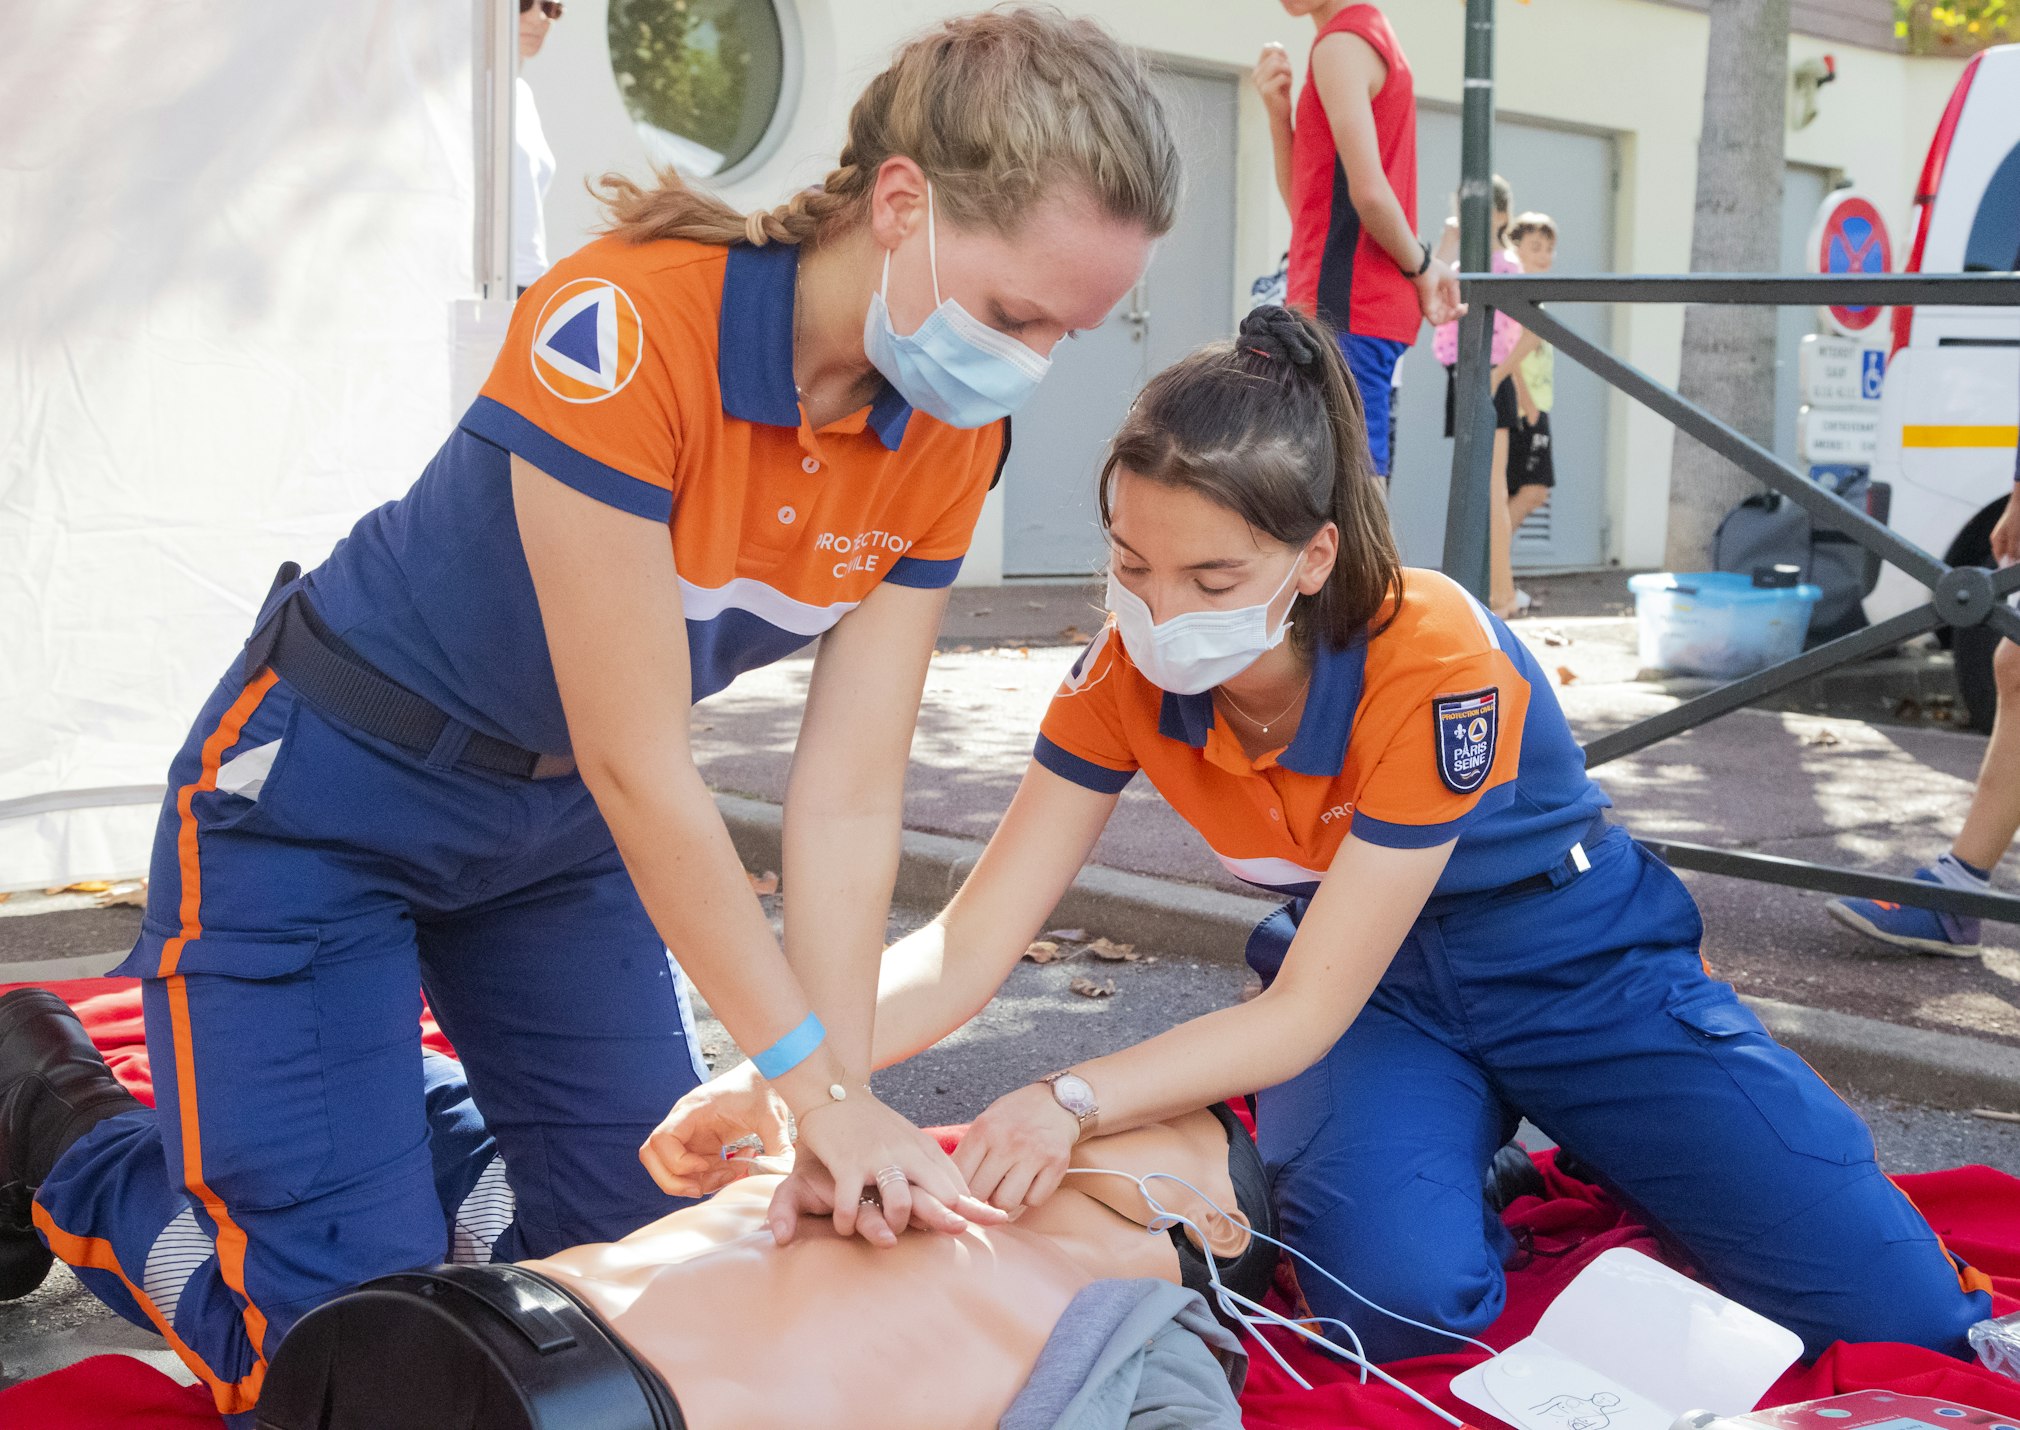 Two women are practicing how to rescue a cardiac arrest victim